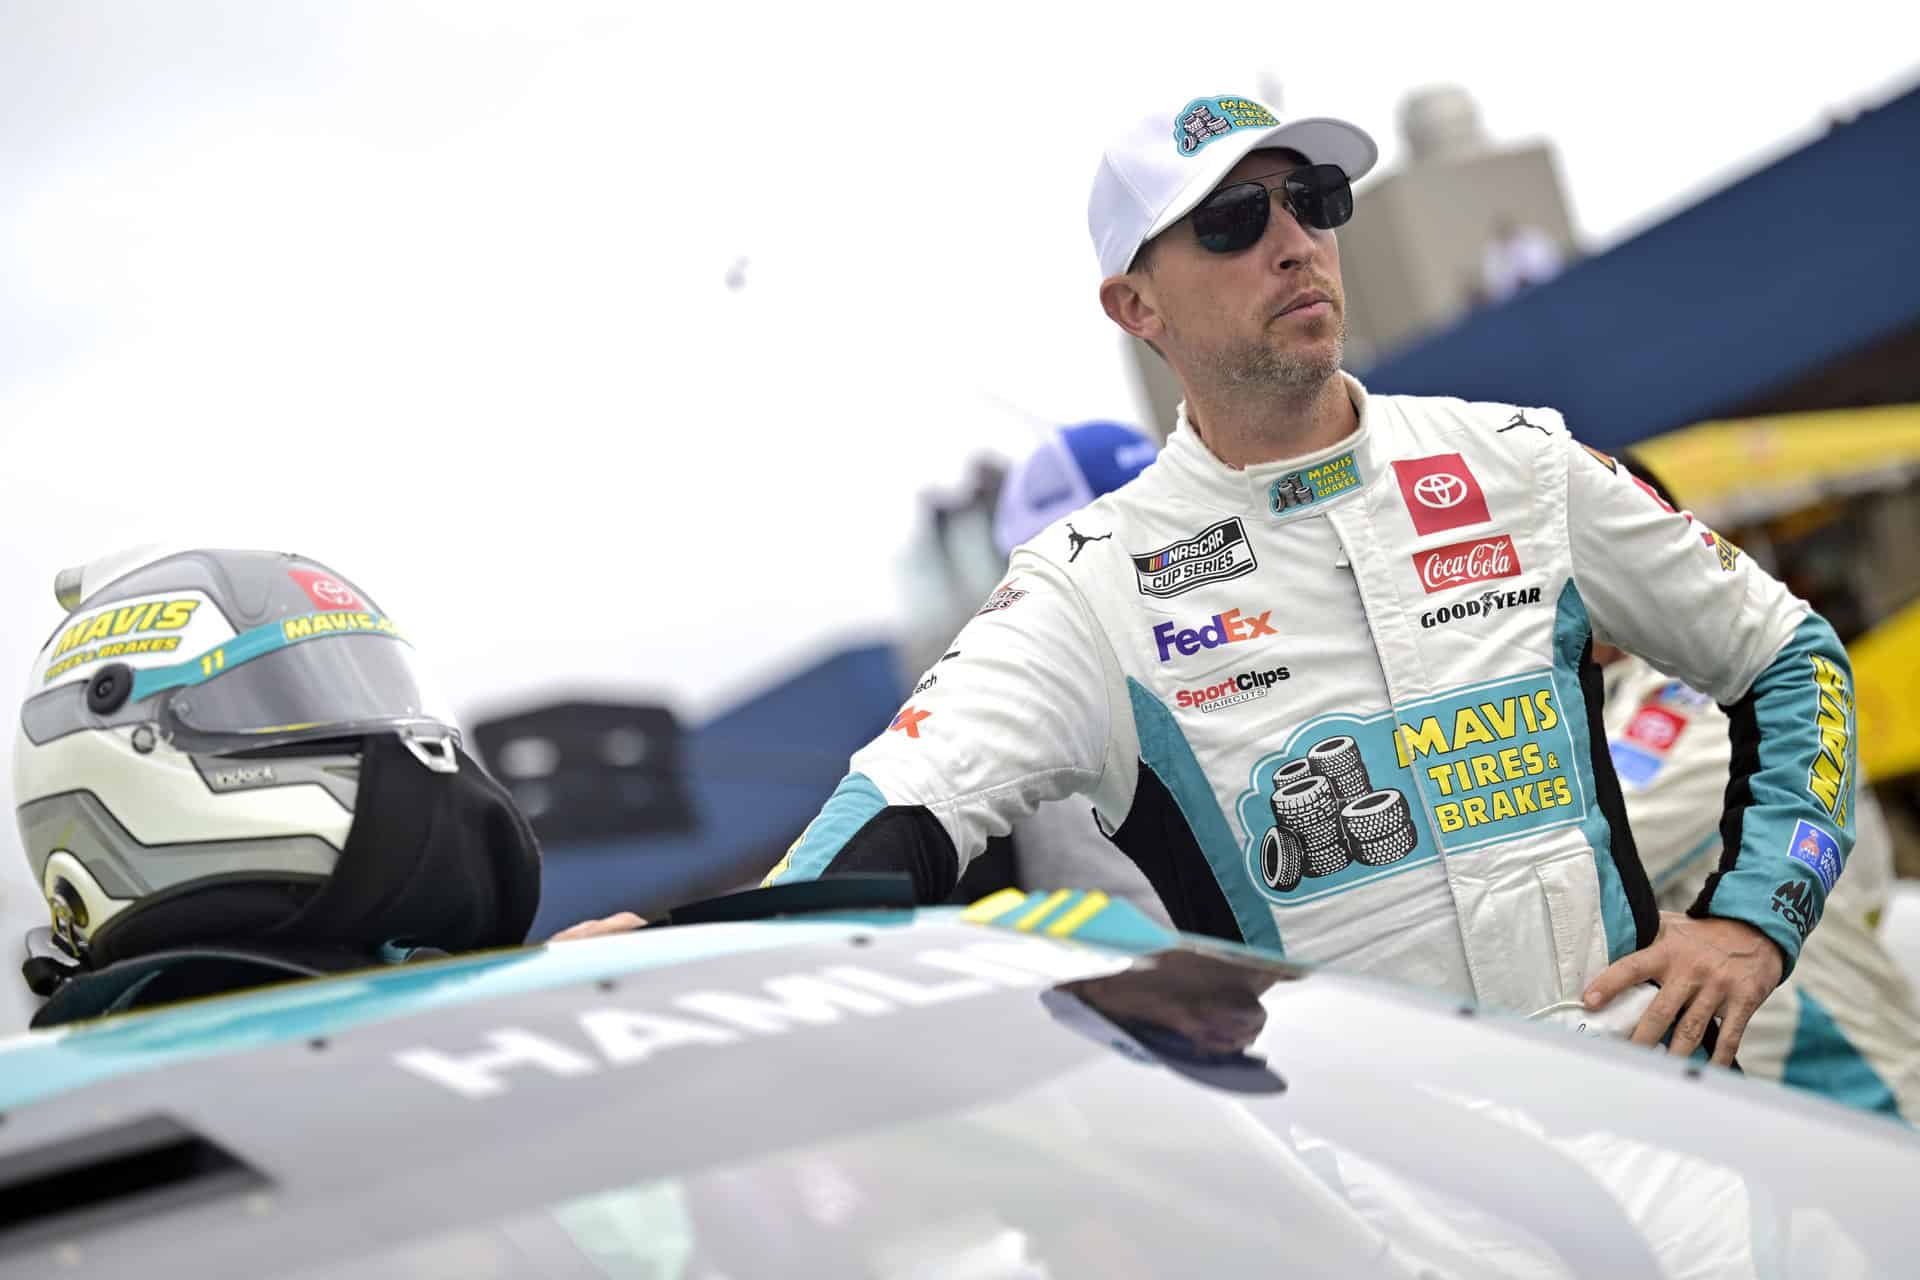 Joe Gibbs Racing's Denny Hamlin rebounded from stalling his Toyota Camry on pit road to score a top-five finish in the NASCAR Cup Series at Michigan International Speedway.